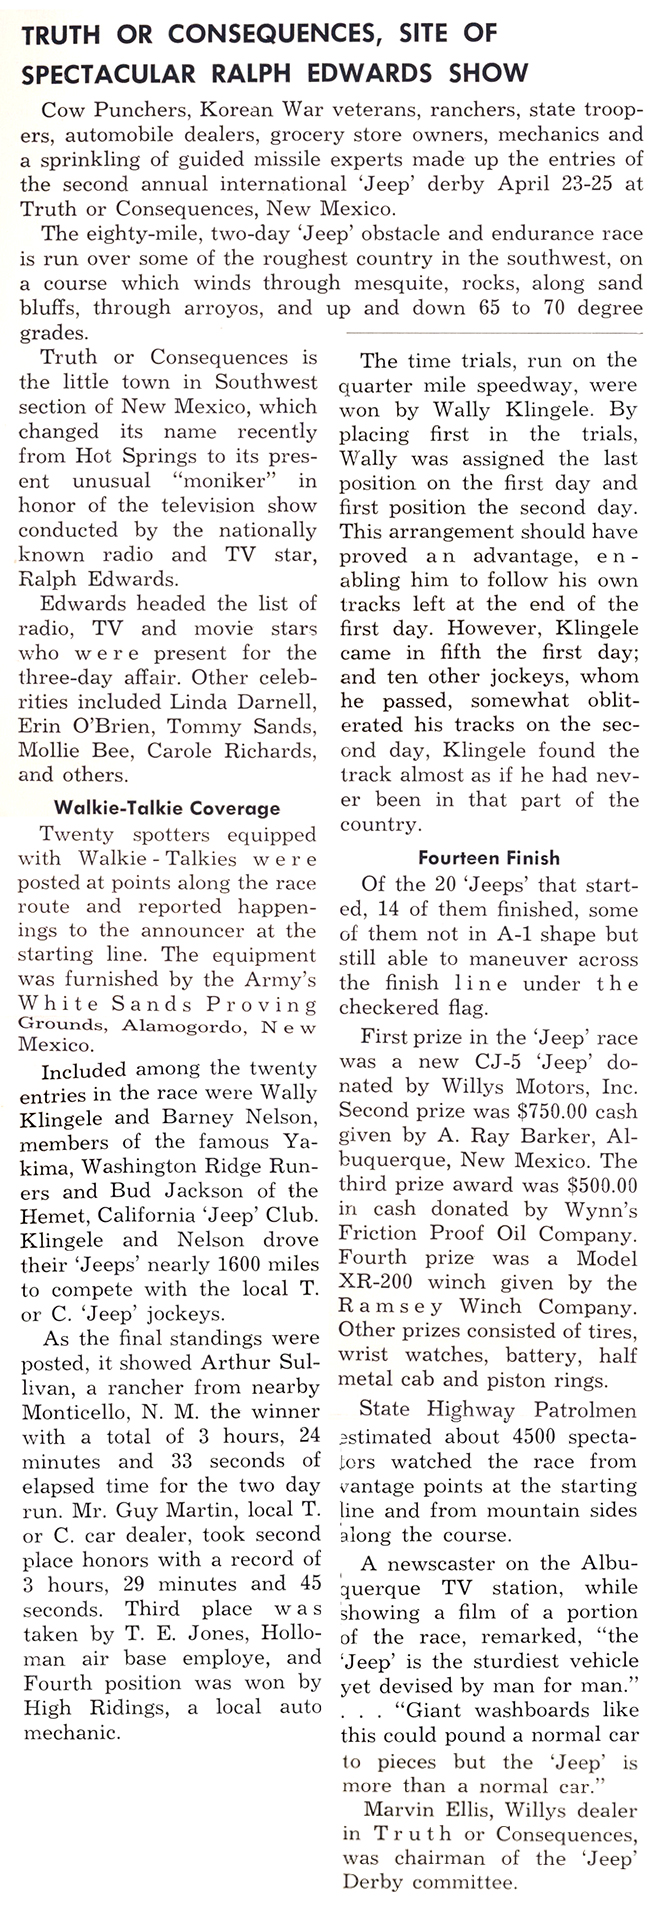 1957-05-willys-news-rodeo-nm-race-text